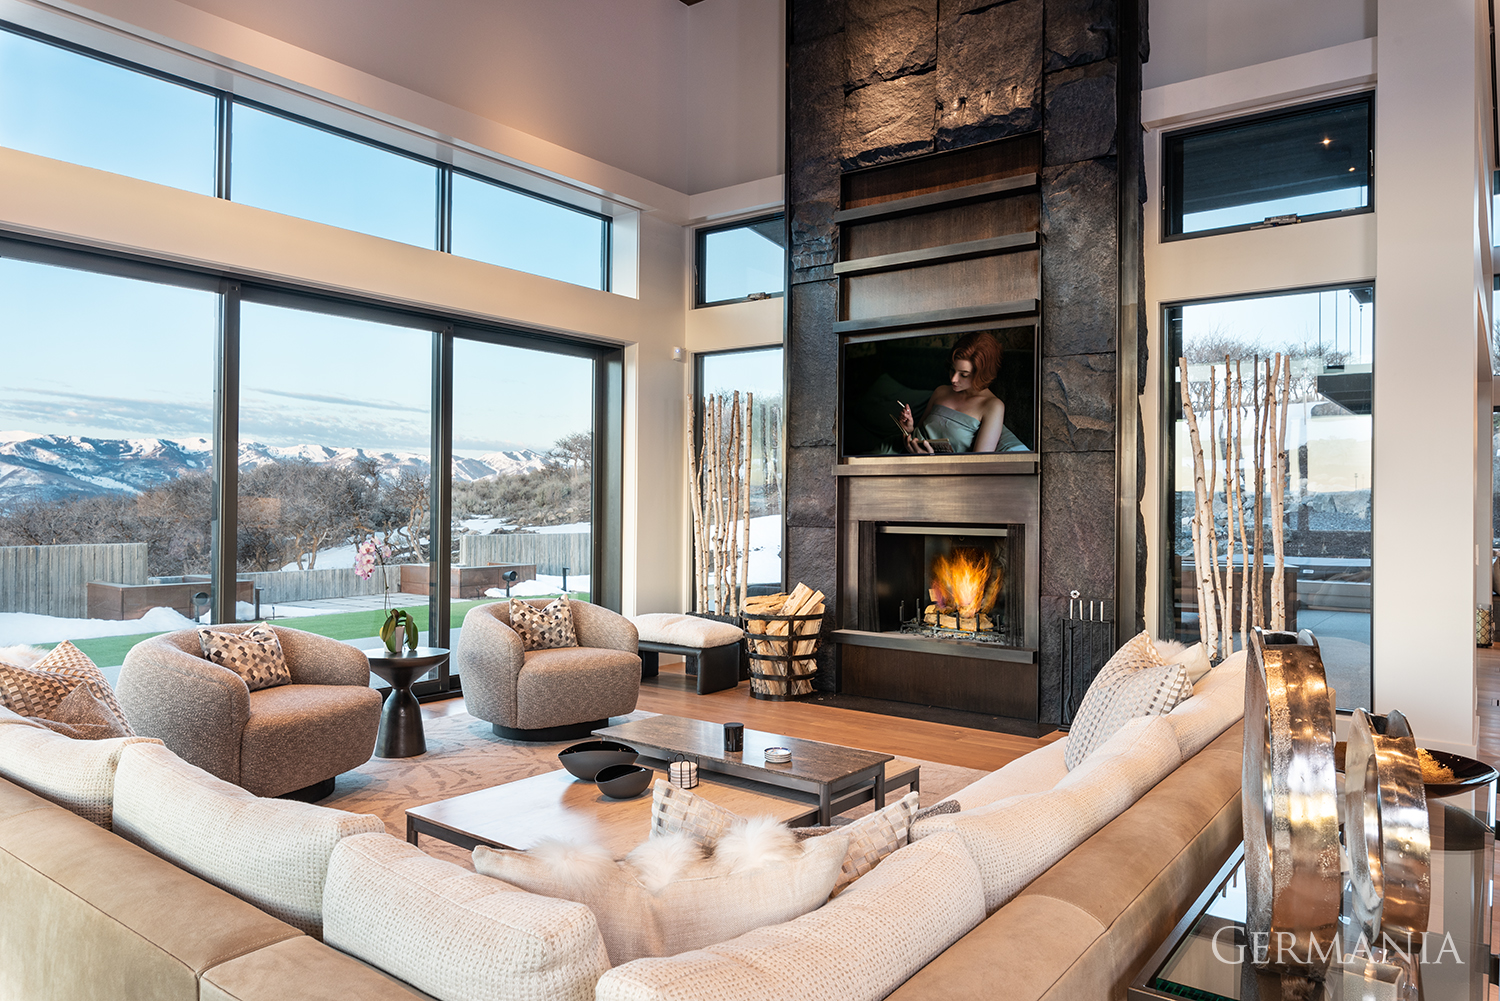 Discover the best living room ideas to decorate your custom luxury home. Floor plans, lighting, mantles, and fireplaces are some of the most popular features in luxurious homes. Take a look at real-life examples and see what’s trending today!